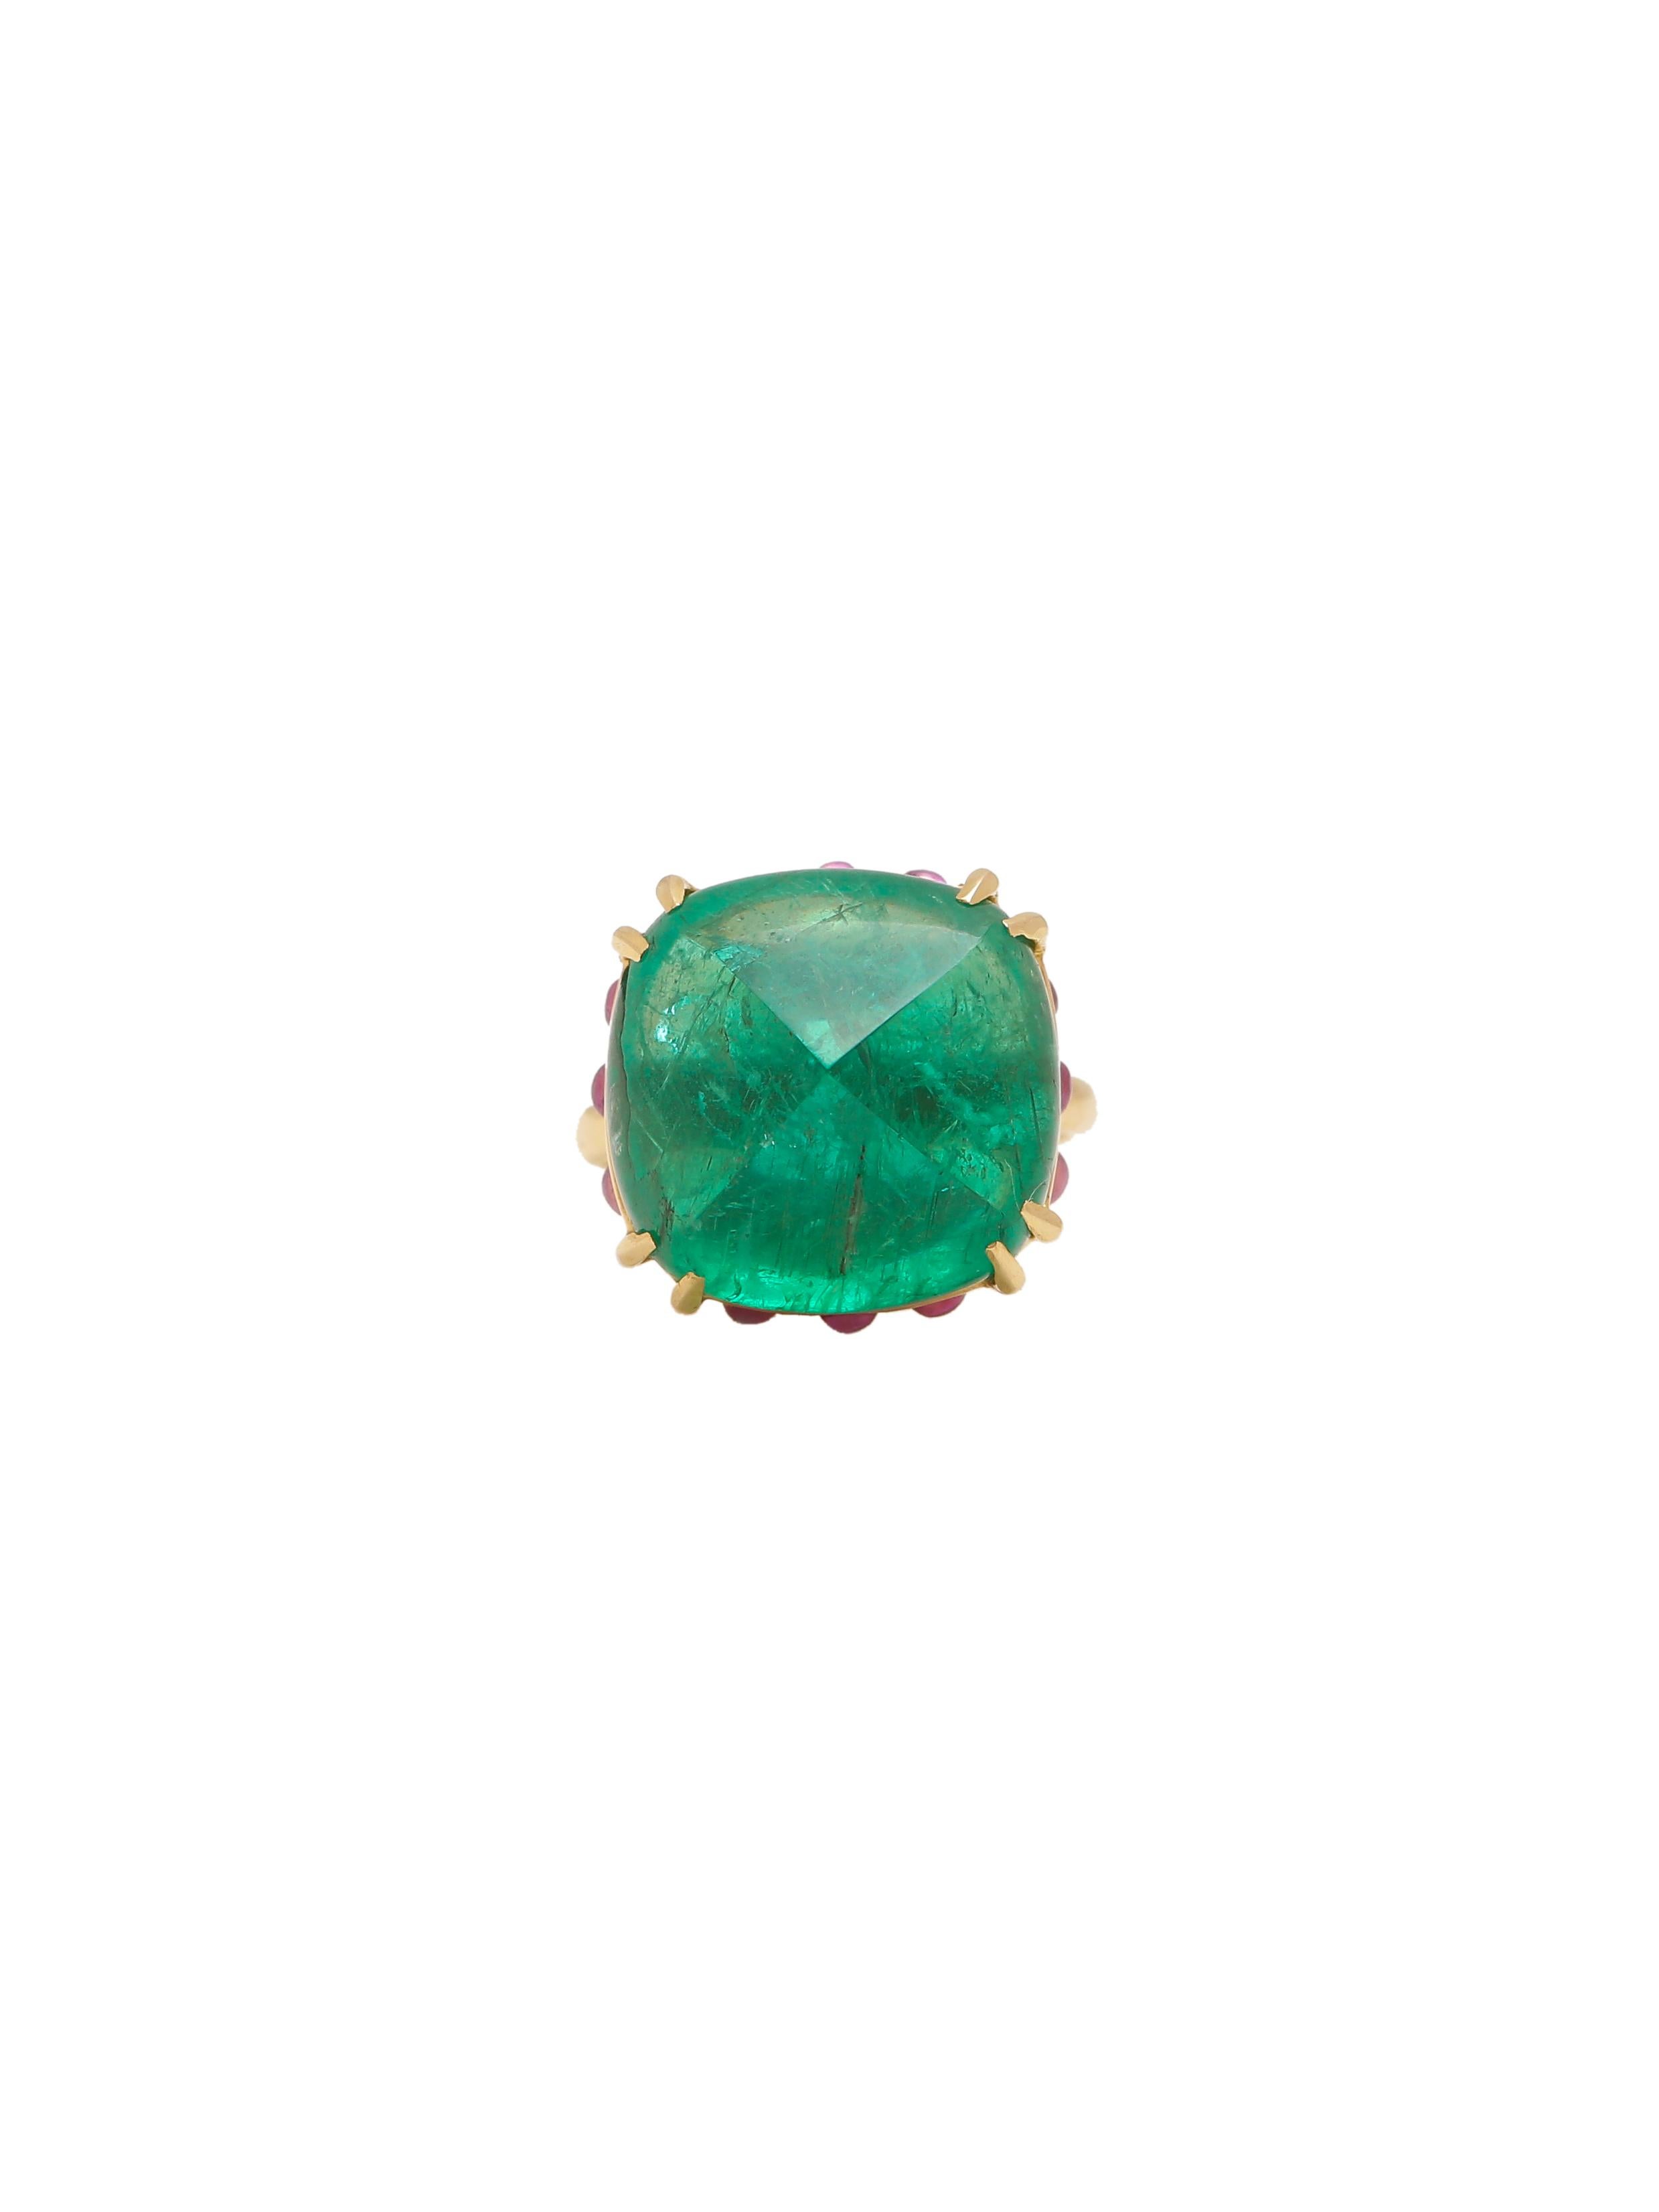 A beautiful ring with a Emerald Cabochon Sugarloaf in the centre and Round Ruby Cabochons carefully set under the stone giving the stone the height and making it stand out as it deserves. The Emerald comes from the famous Zambian mines and is a very